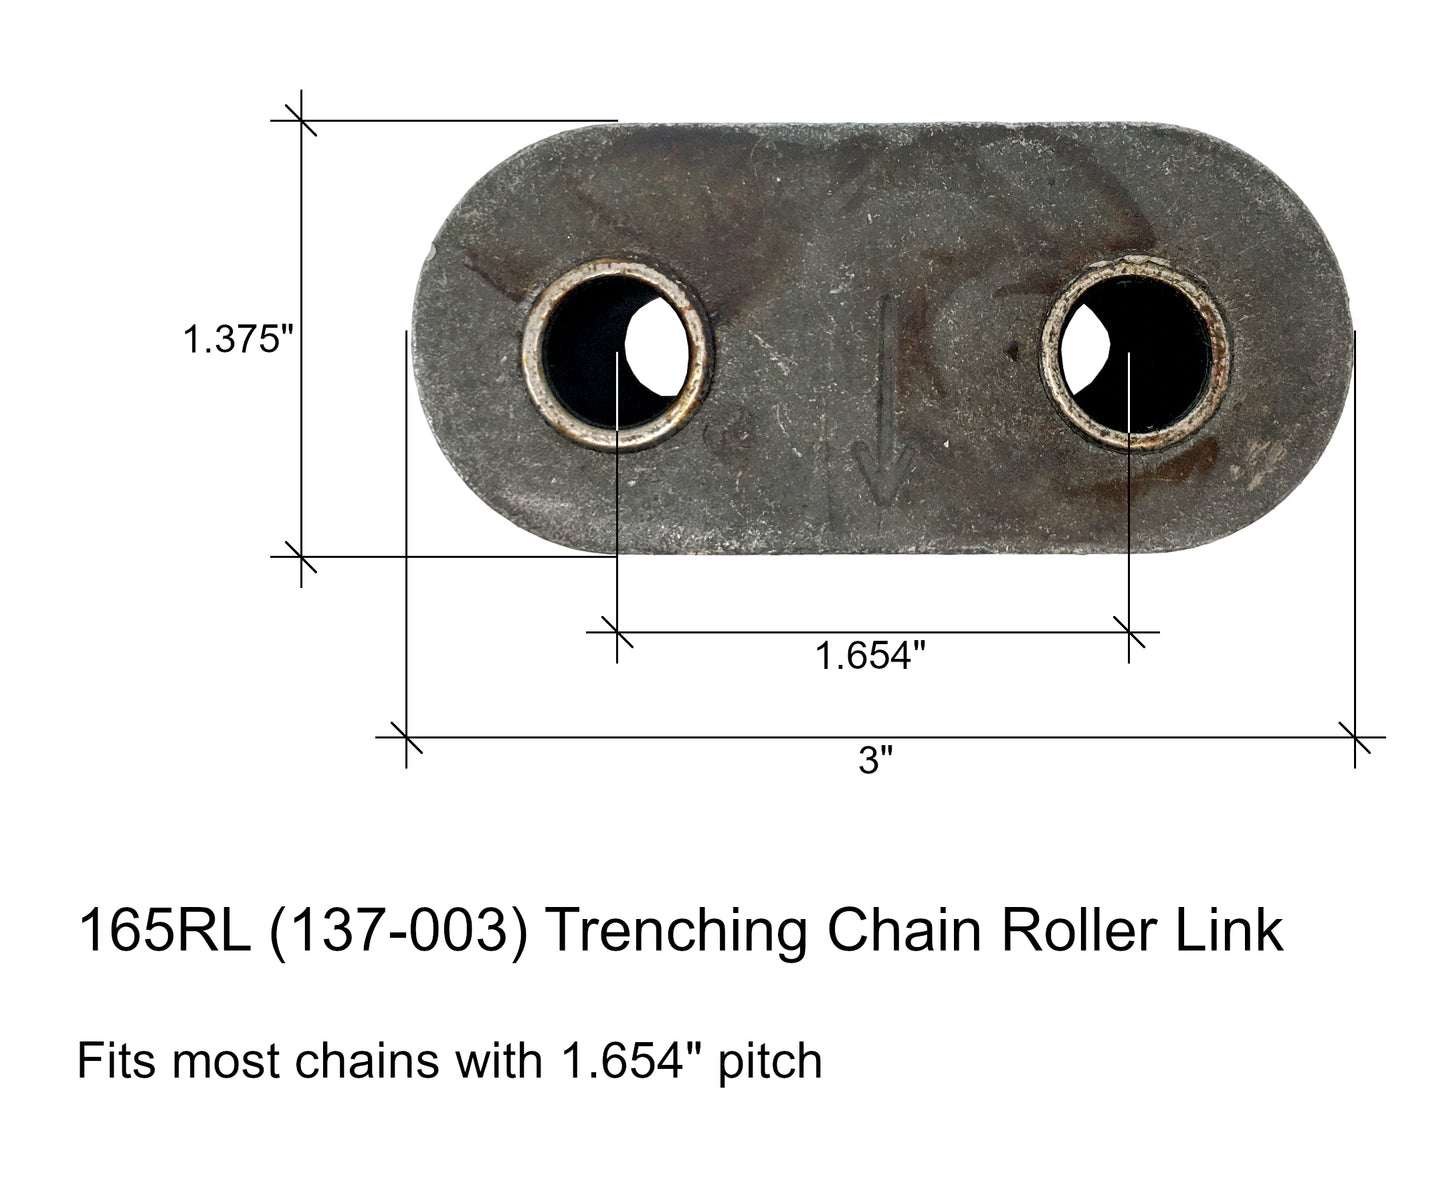 Trenching Chain Roller Link, Fits Chains w/ 1.654" Pitch - 137-003, 165RL